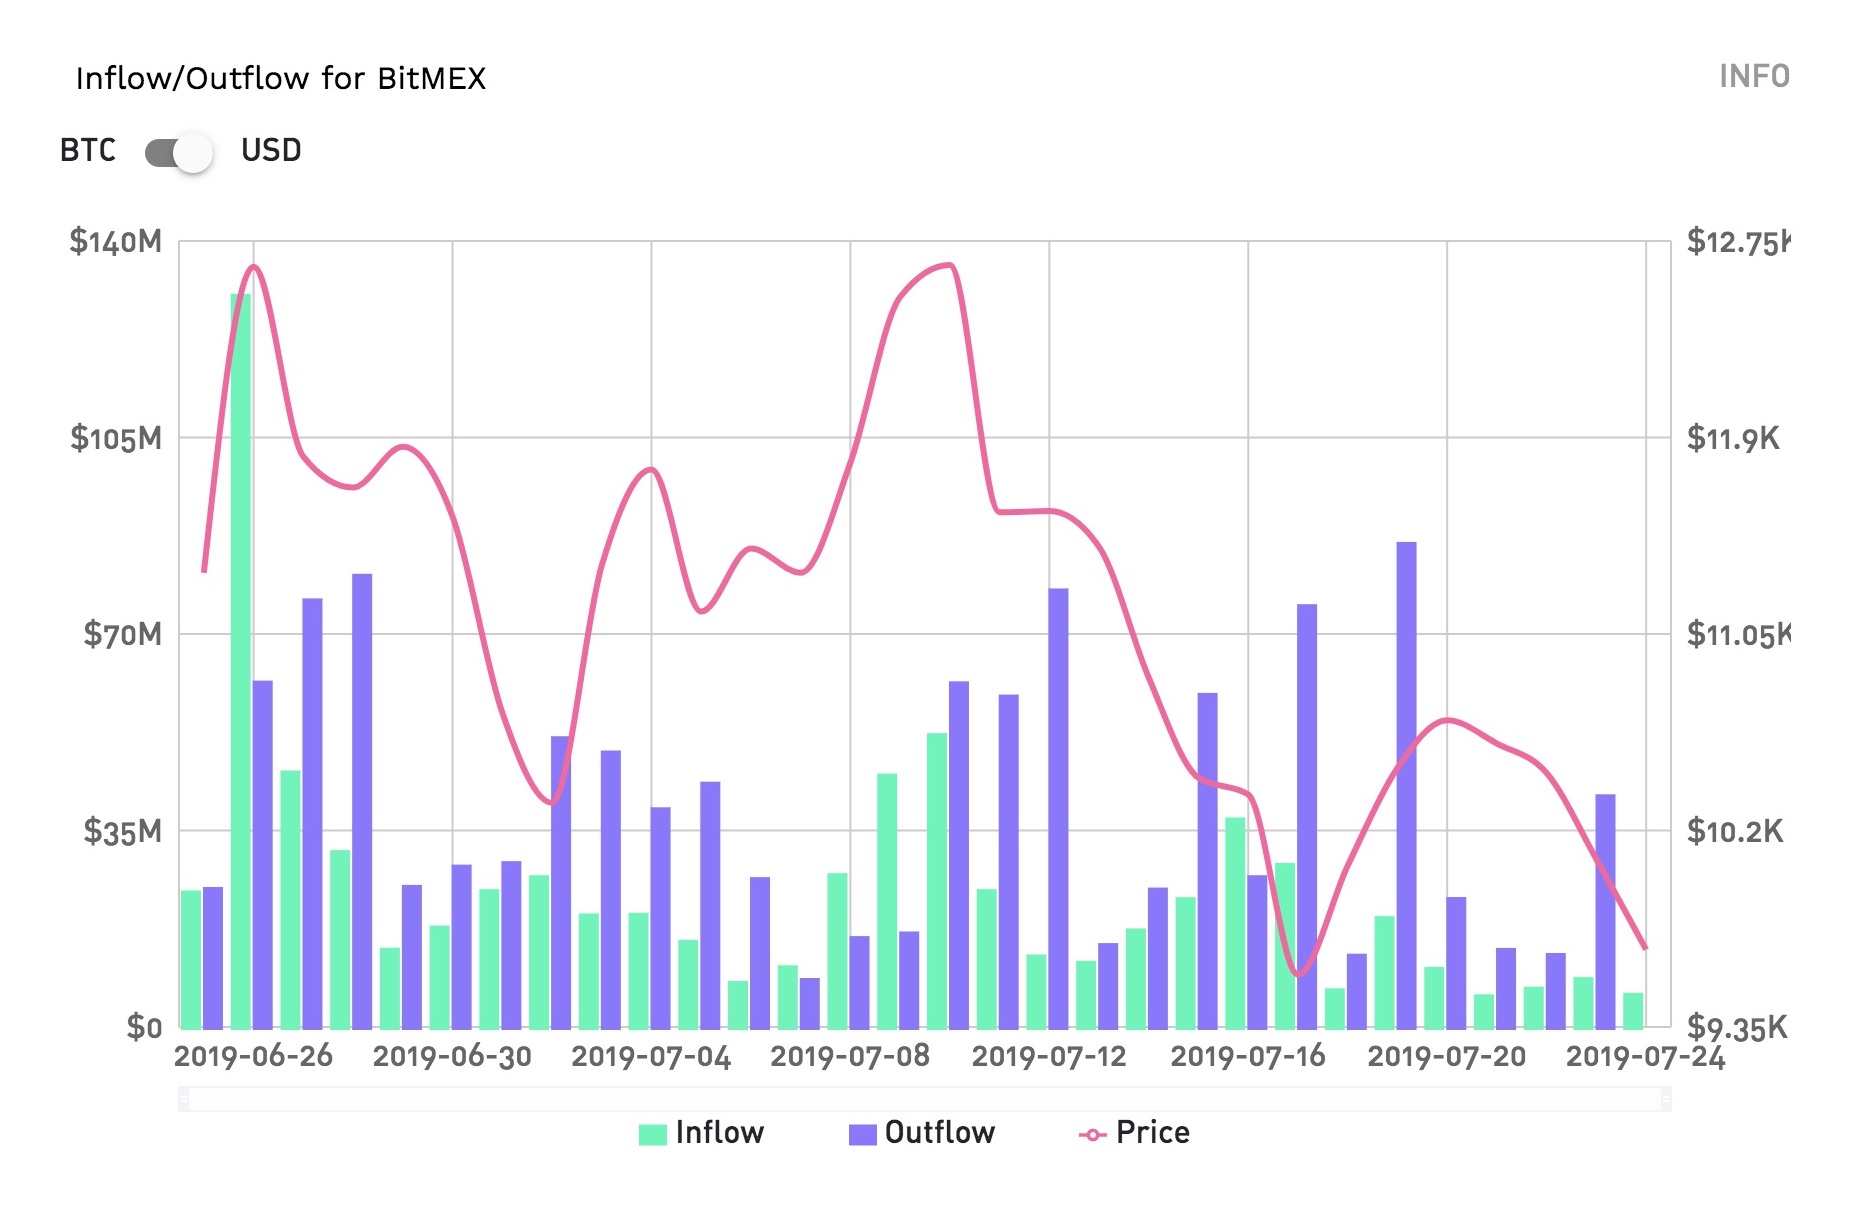 BitMEX suffering from a sustained loss in funds